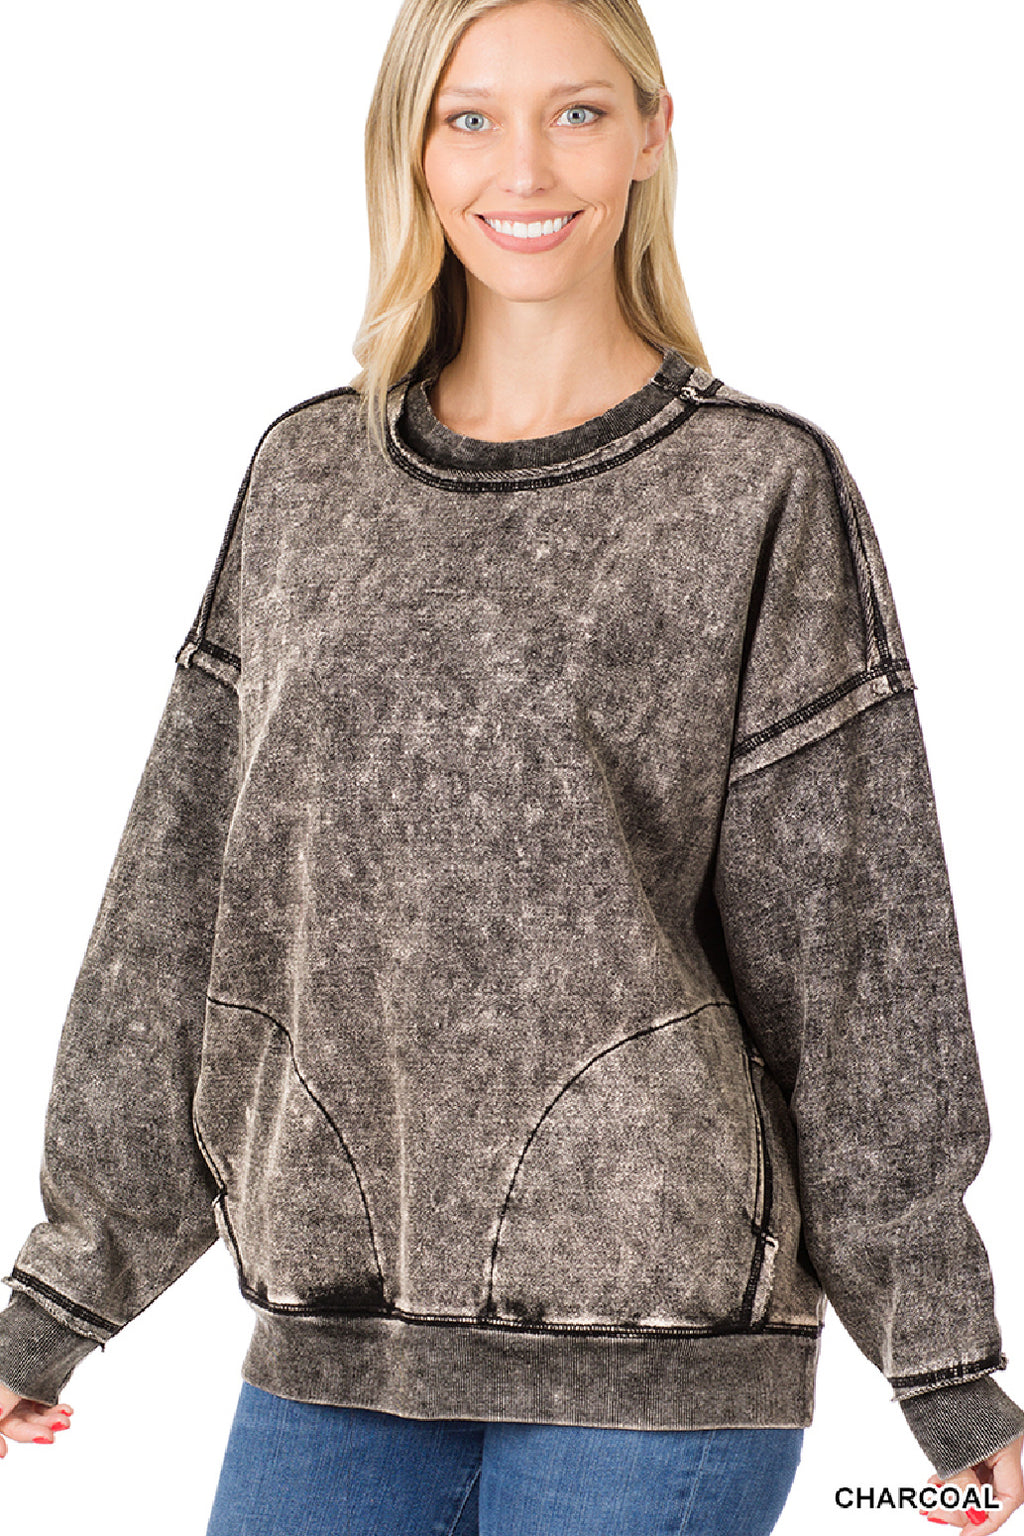 French Terry Charcoal Mineral Wash Sweatshirt